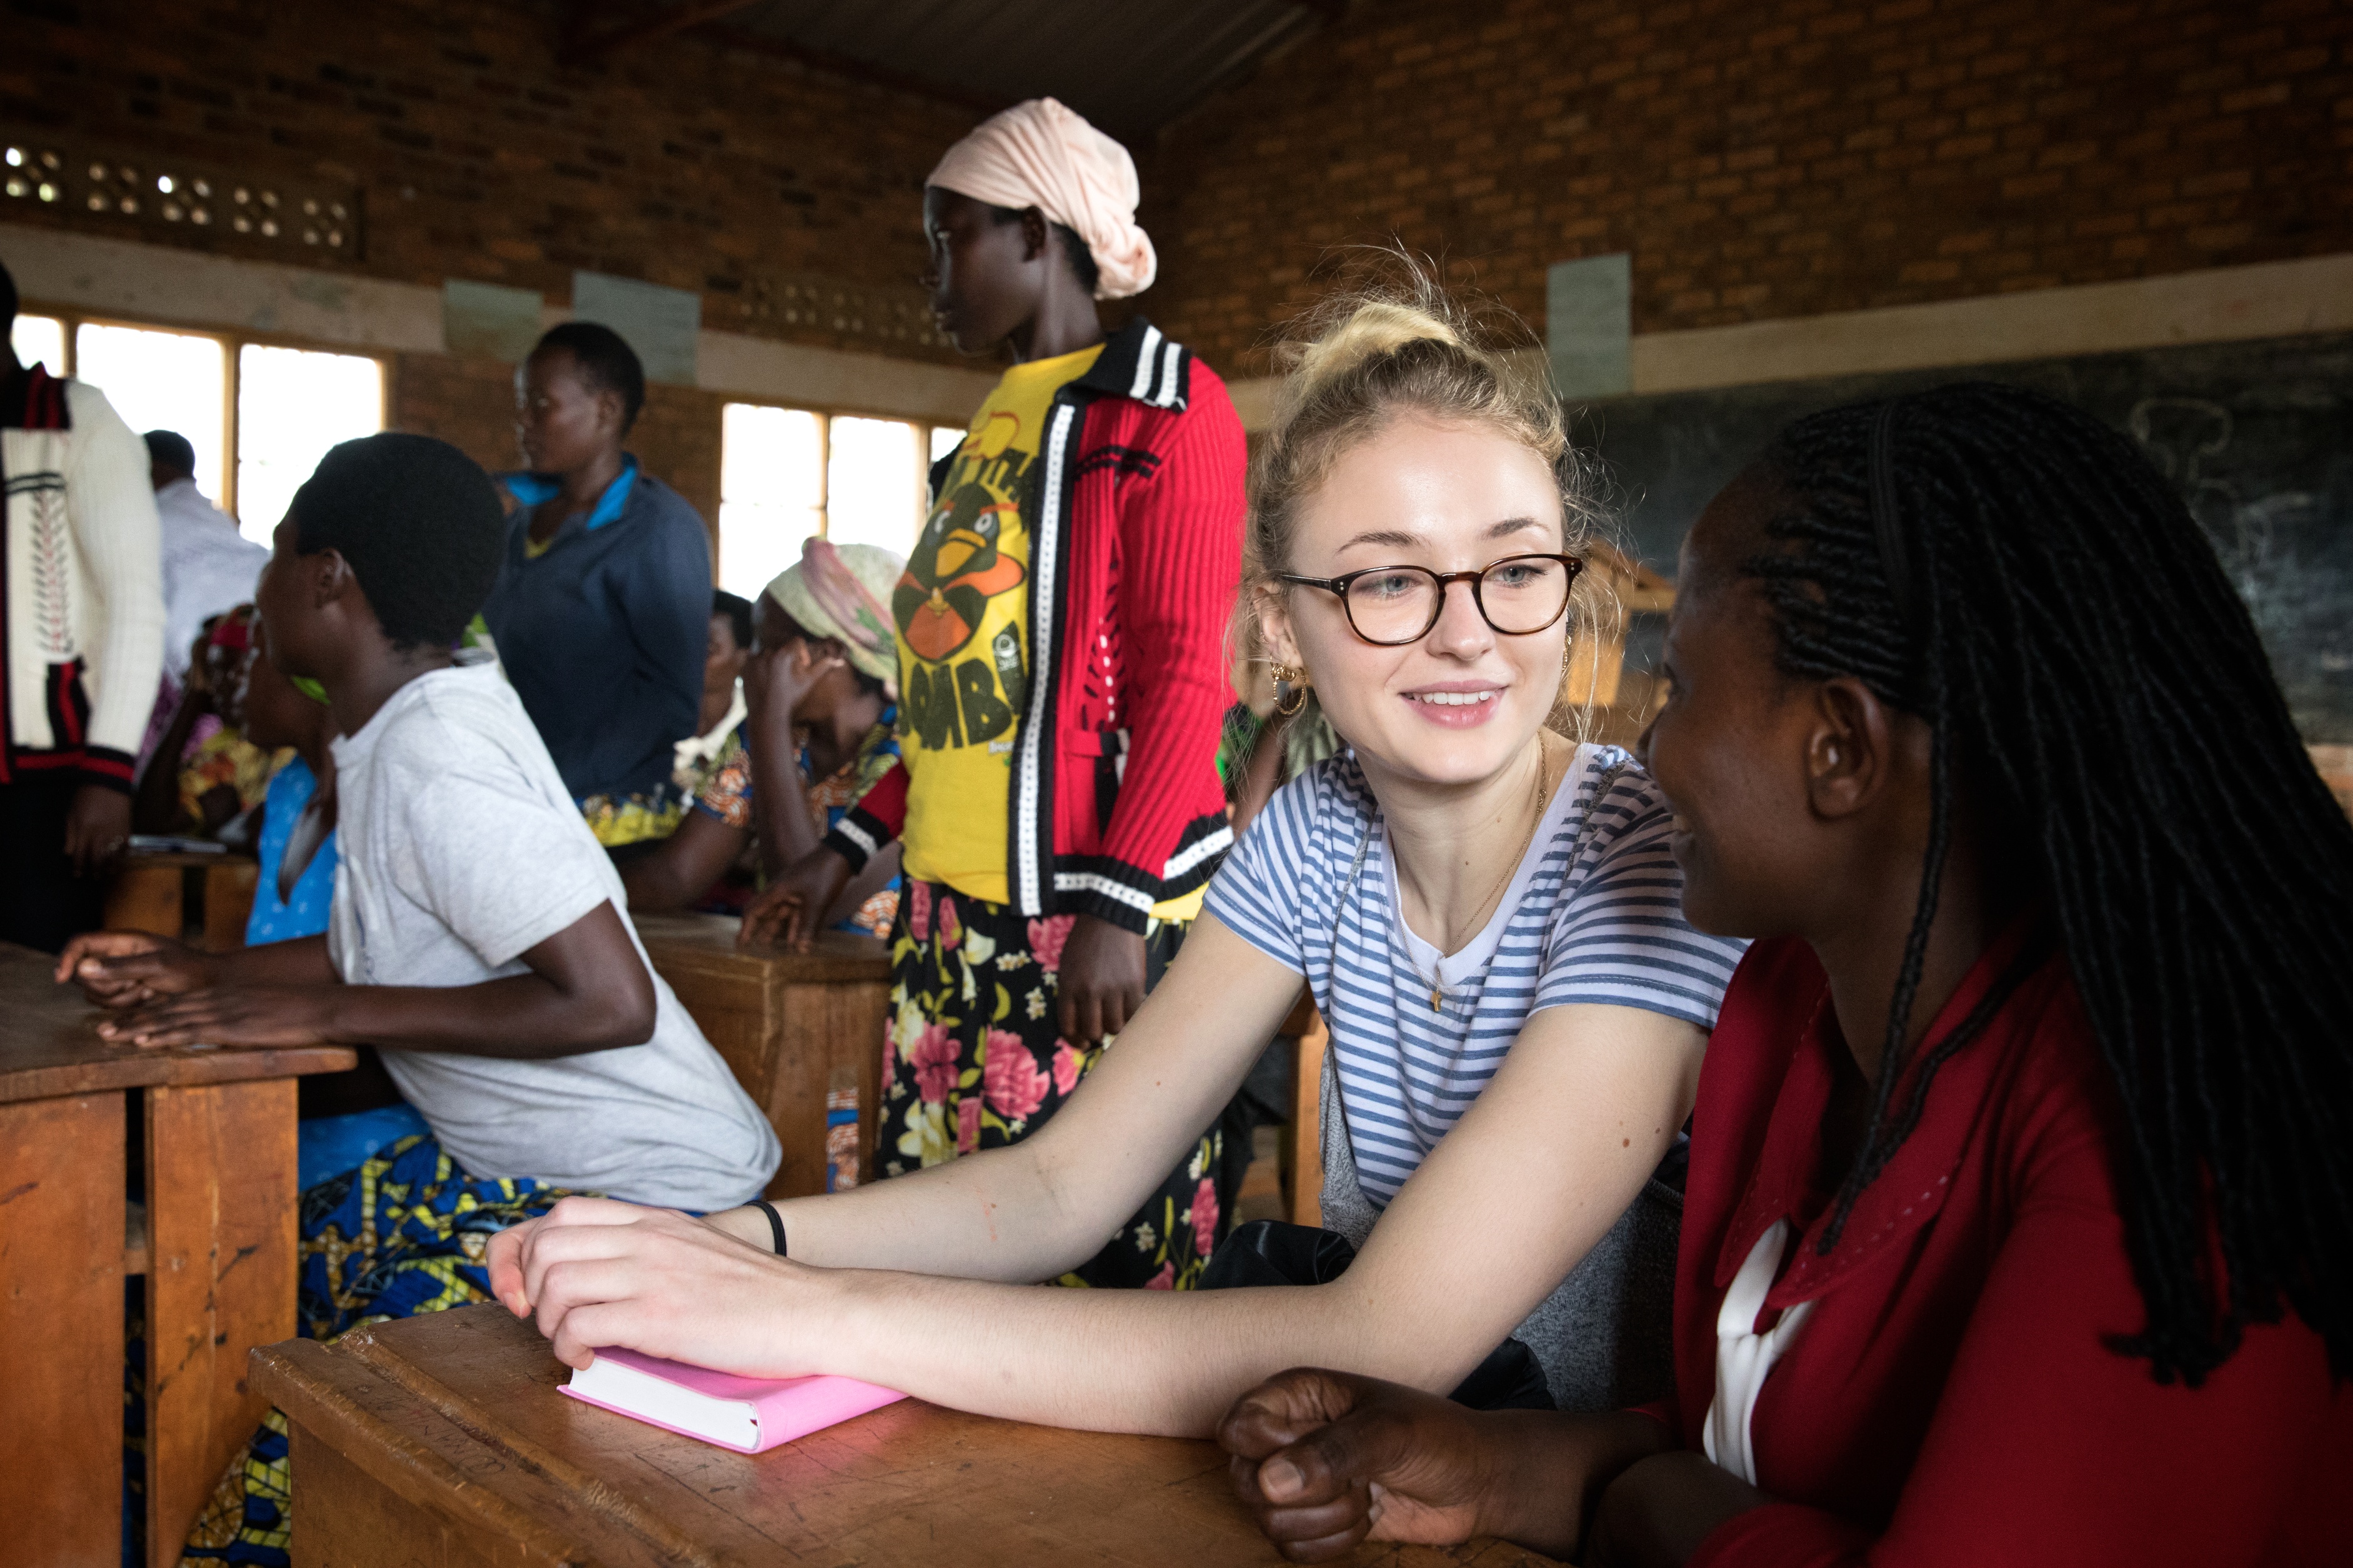 How 'Game of Thrones' Star Sophie Turner's Activism Was Inspired by her Role as Sansa Stark © Hazel Thompson for WFWI UK Sophie Turner visiting WFWI projects in Rwanda. Caption: Justine Mbabazi, Social Empowerment Manager for Women for Women International  Rwanda, explaining the content of the class to Sophie Turner. The class is taking place in a local primary school in Mubano village (Masaka Sector), central Rwanda. During the year-long programme, women come together in classes of 25 to learn a marketable job skill (such as tailoring, brick-making or poultry-keeping) as well as business training to turn their chosen skill into a stable income. They also learn practical knowledge about health, nutrition and about their rights on key issues like voting, access to land and domestic abuse.